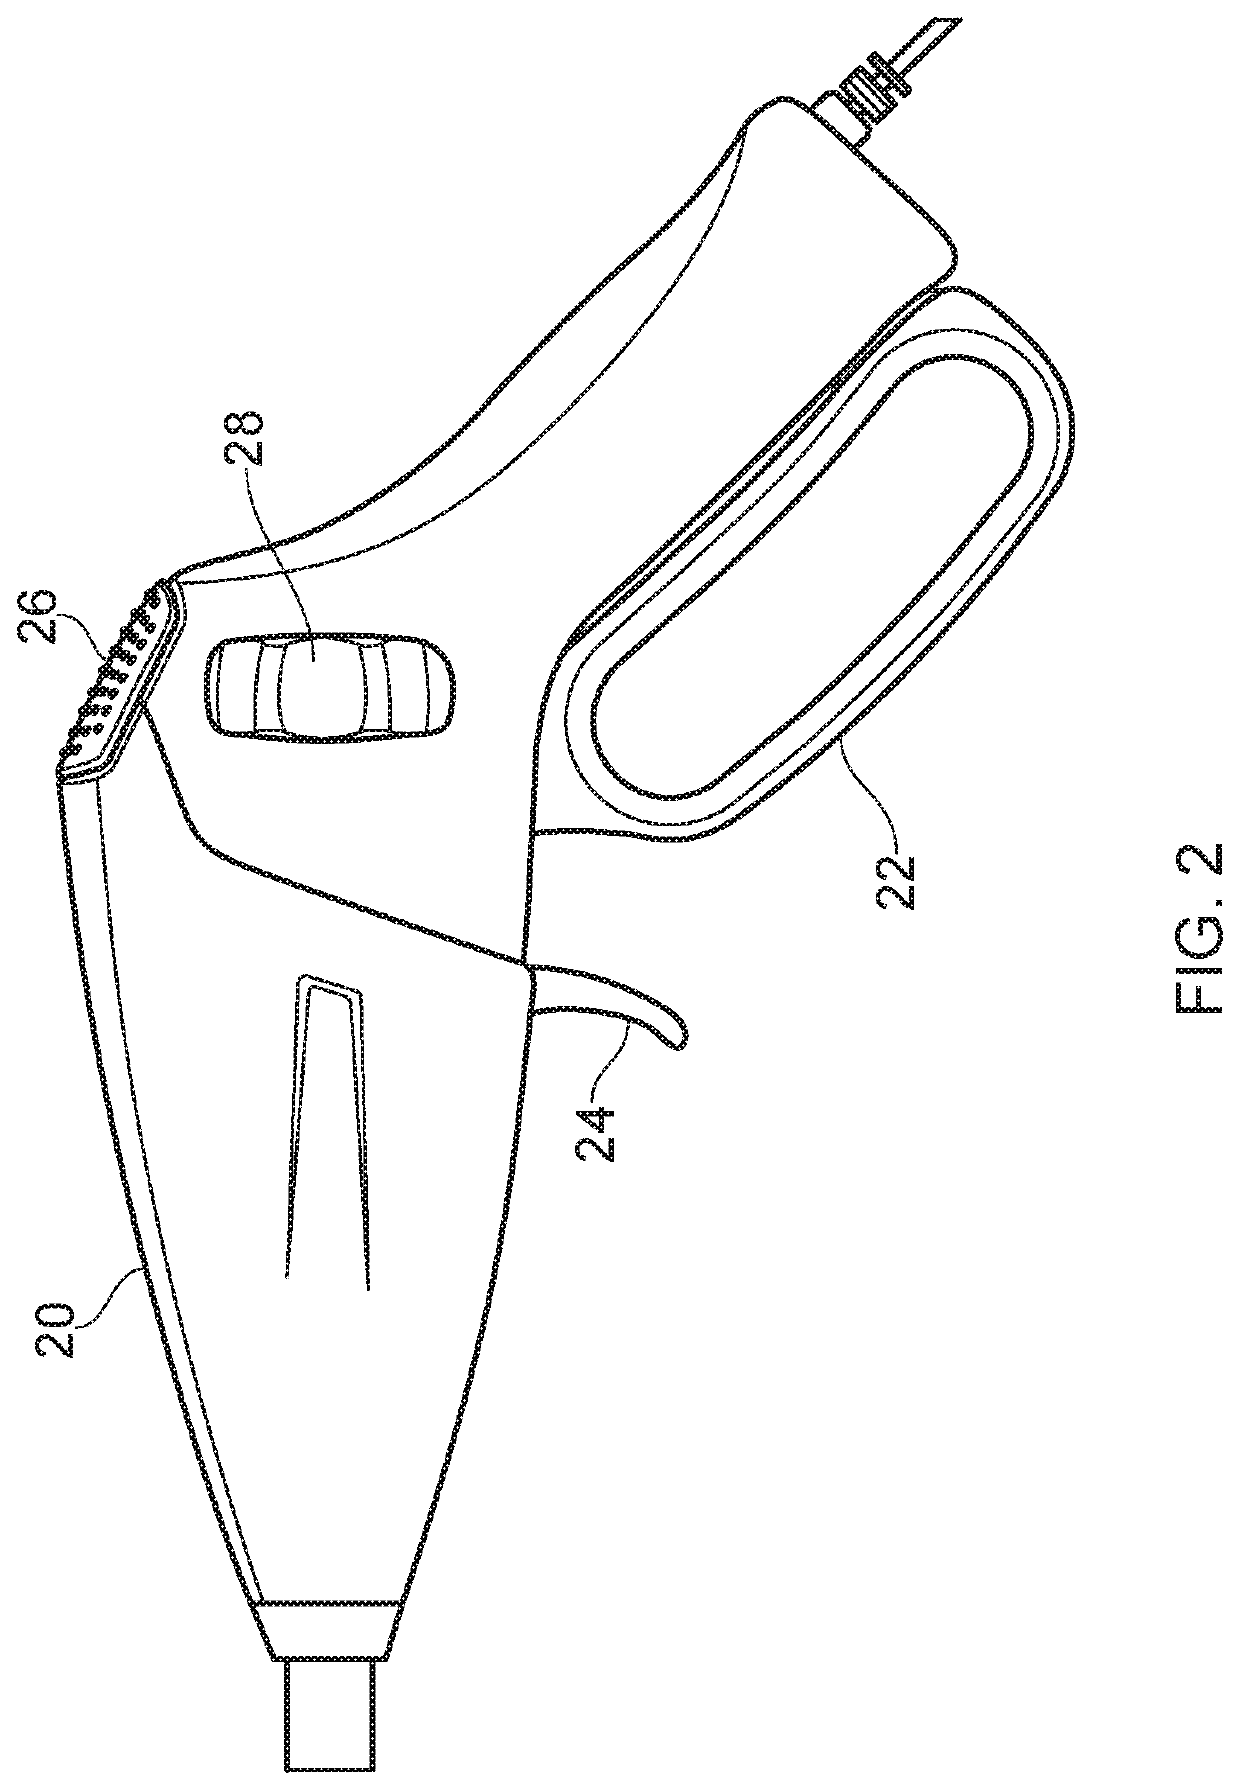 Electrosurgical device